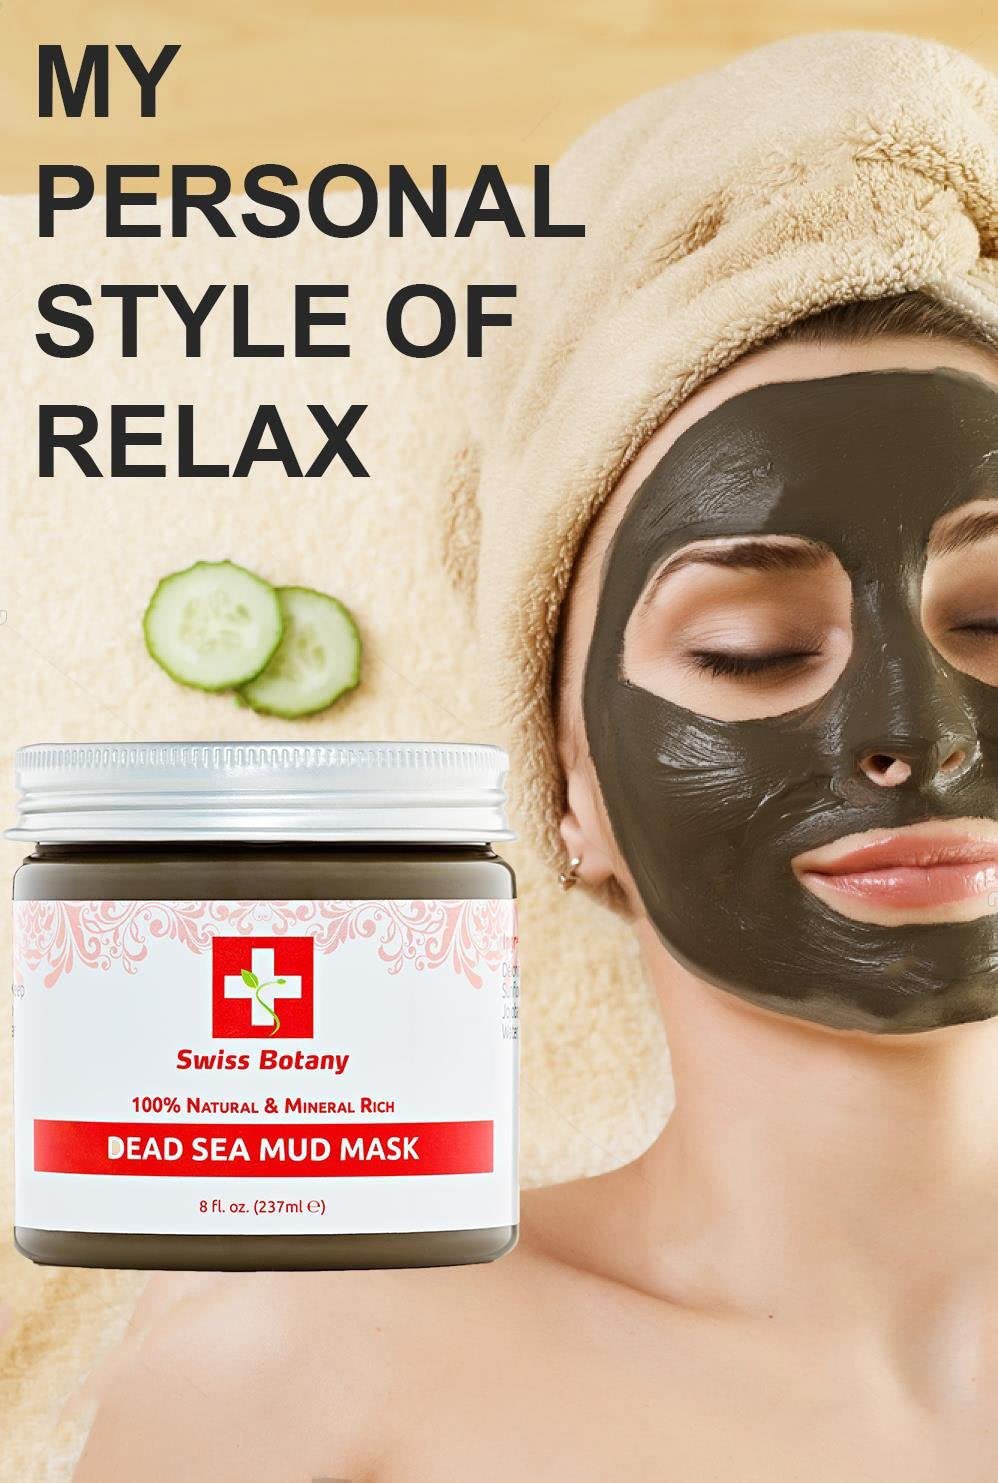 Swiss Botany Beauty 1 / 1 / Aloe Vera Swiss Botany Dead Sea Mud Mask - Exfoliates Pores & Hydrates Dry Skin - Organic Formula Uses Dead Sea Mud Imported from Israel - Use as Needed - Most Skin Types - Good for Men & Women - 8 fl oz